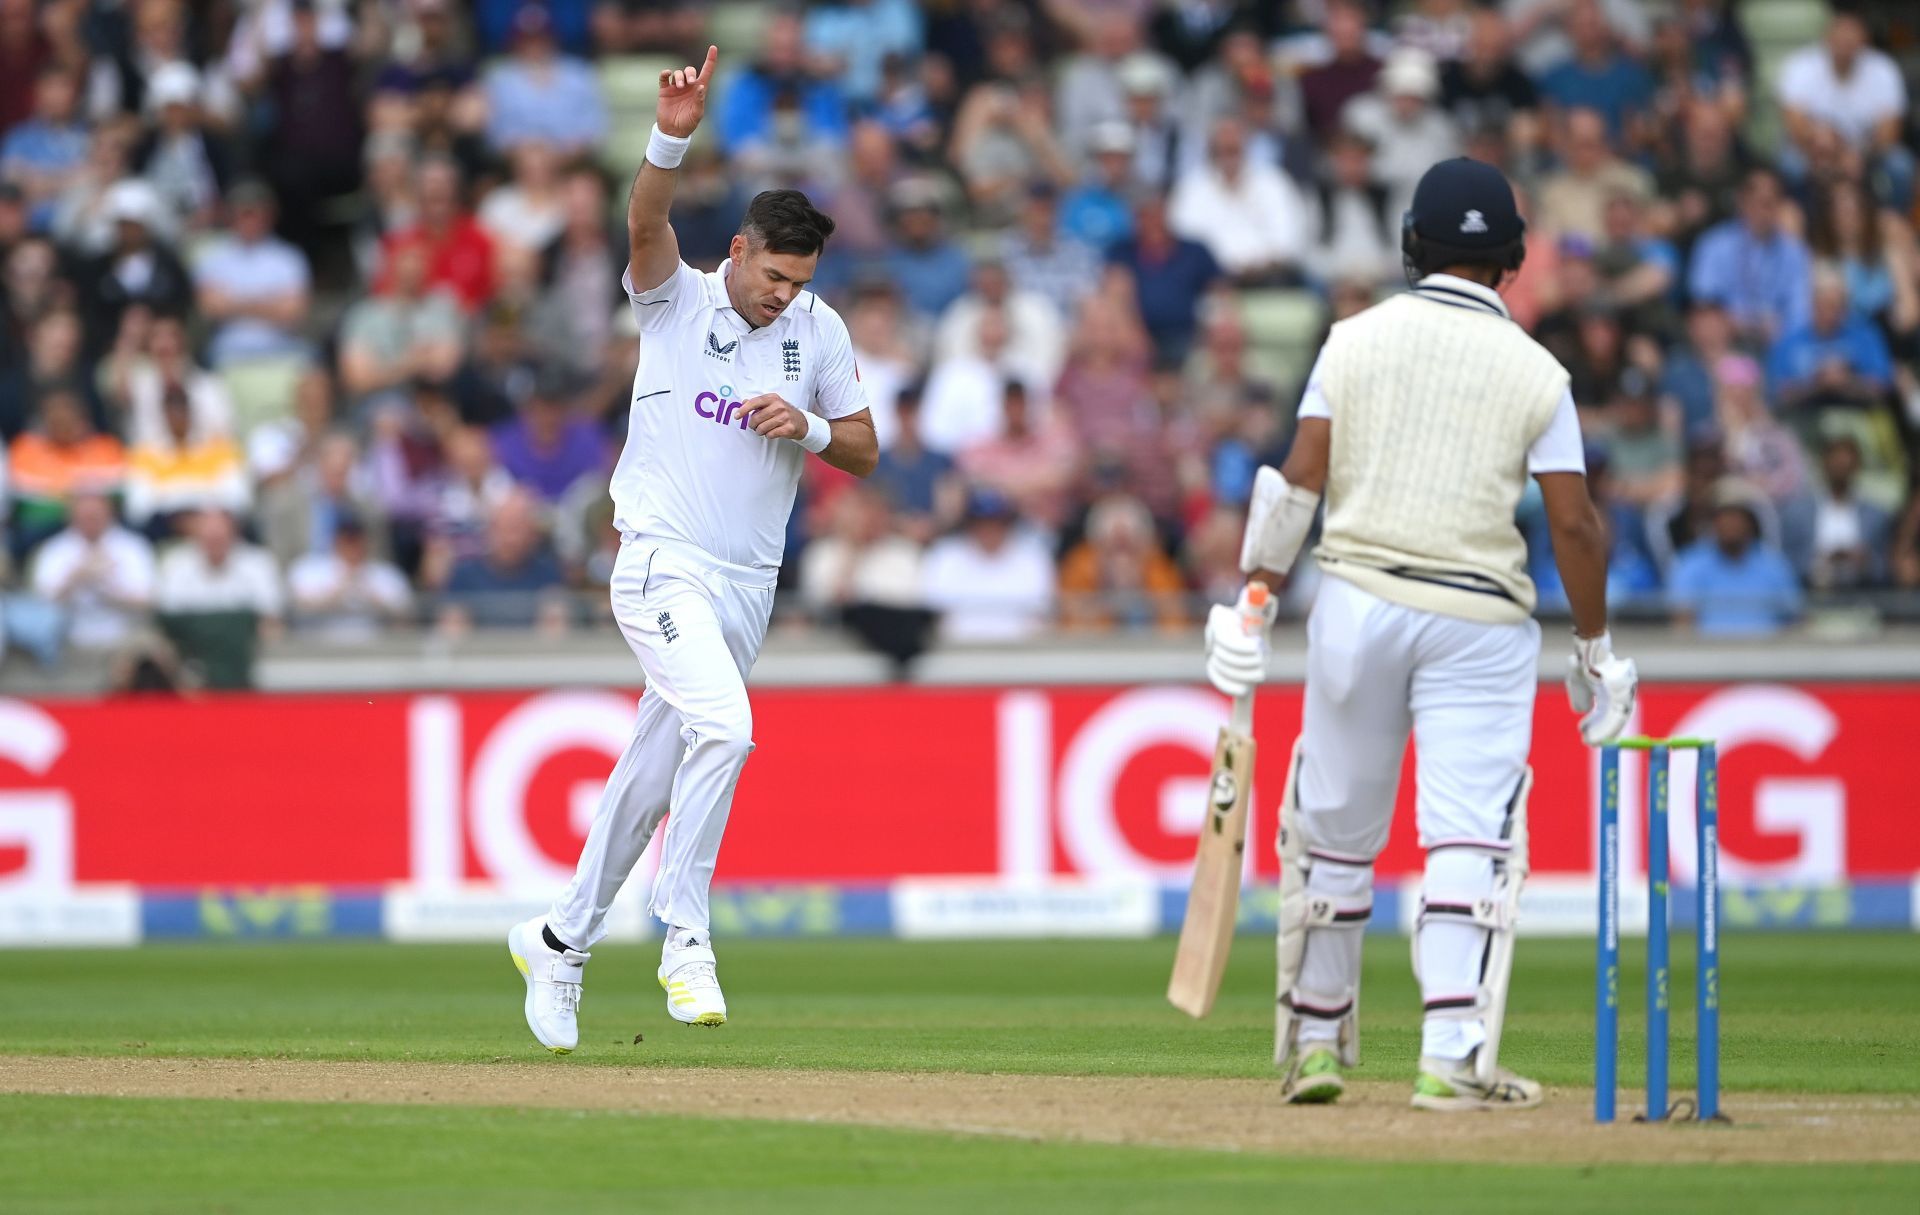 James Anderson is the leading wicket-taker in Tests against India. (Pic: Getty Images)